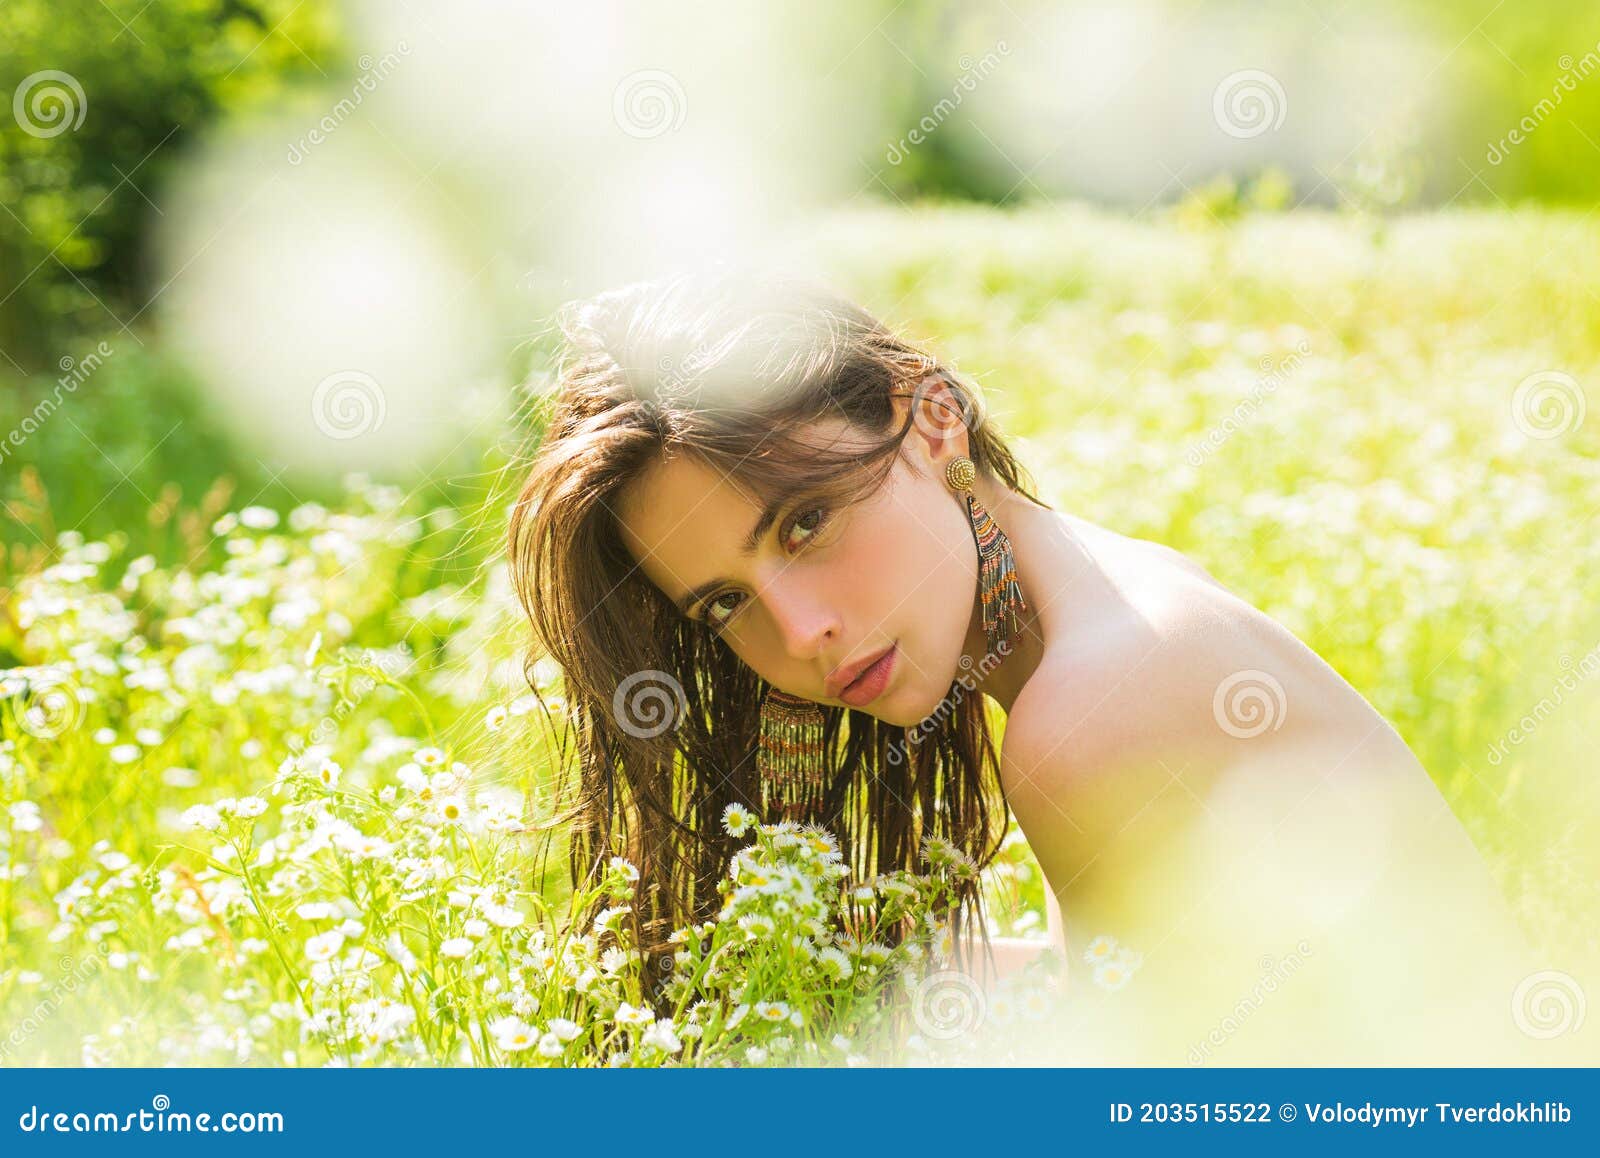 Midler onsdag smertefuld 70,544 Sexy Nature Girl Photos - Free & Royalty-Free Stock Photos from  Dreamstime